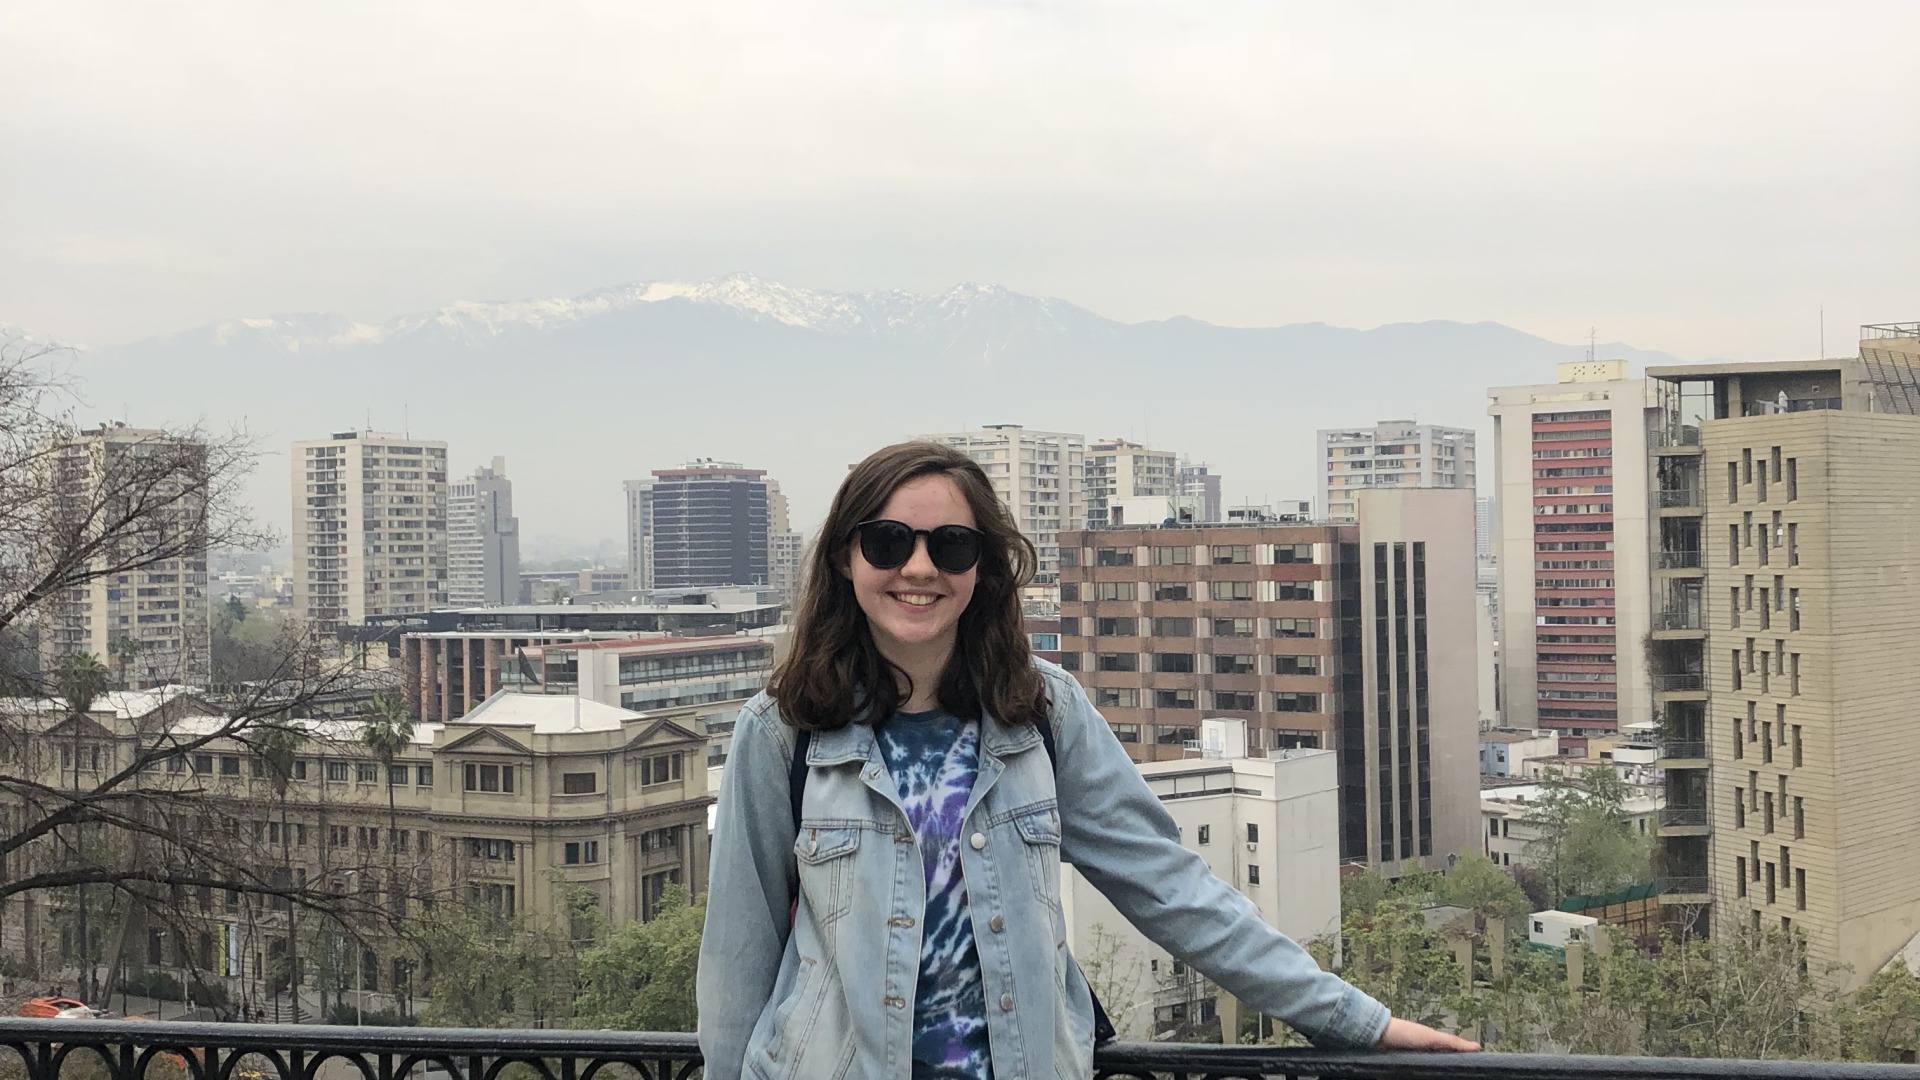 Me leaning against a fence with Chilean skyscrapers in the foggy background!